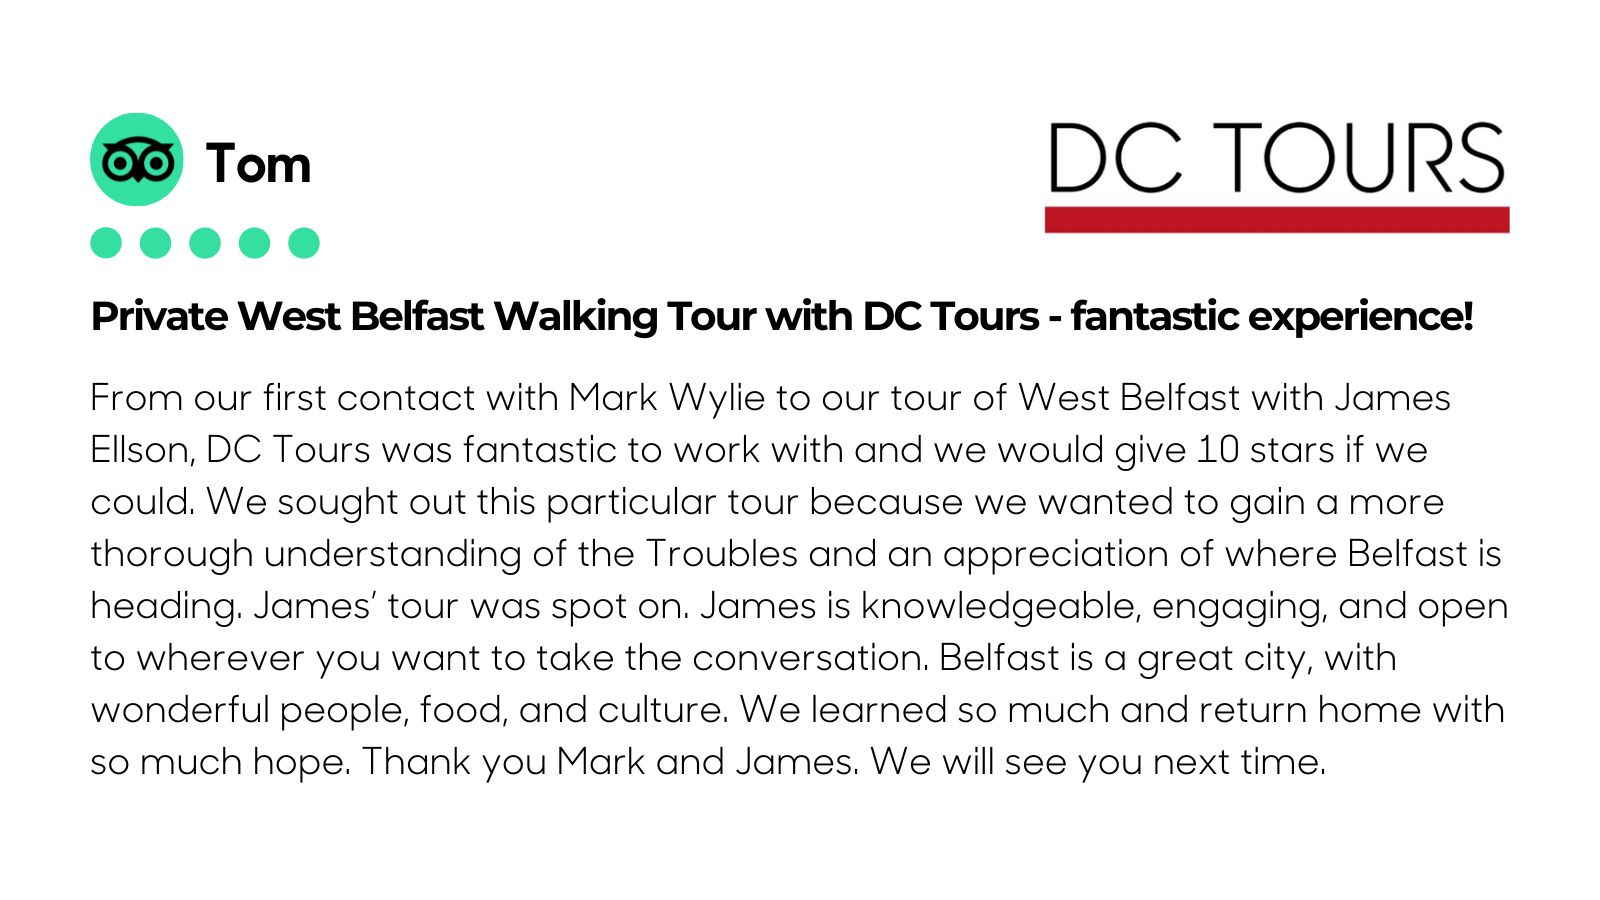 A review of one of our private tours on Tripadvisor